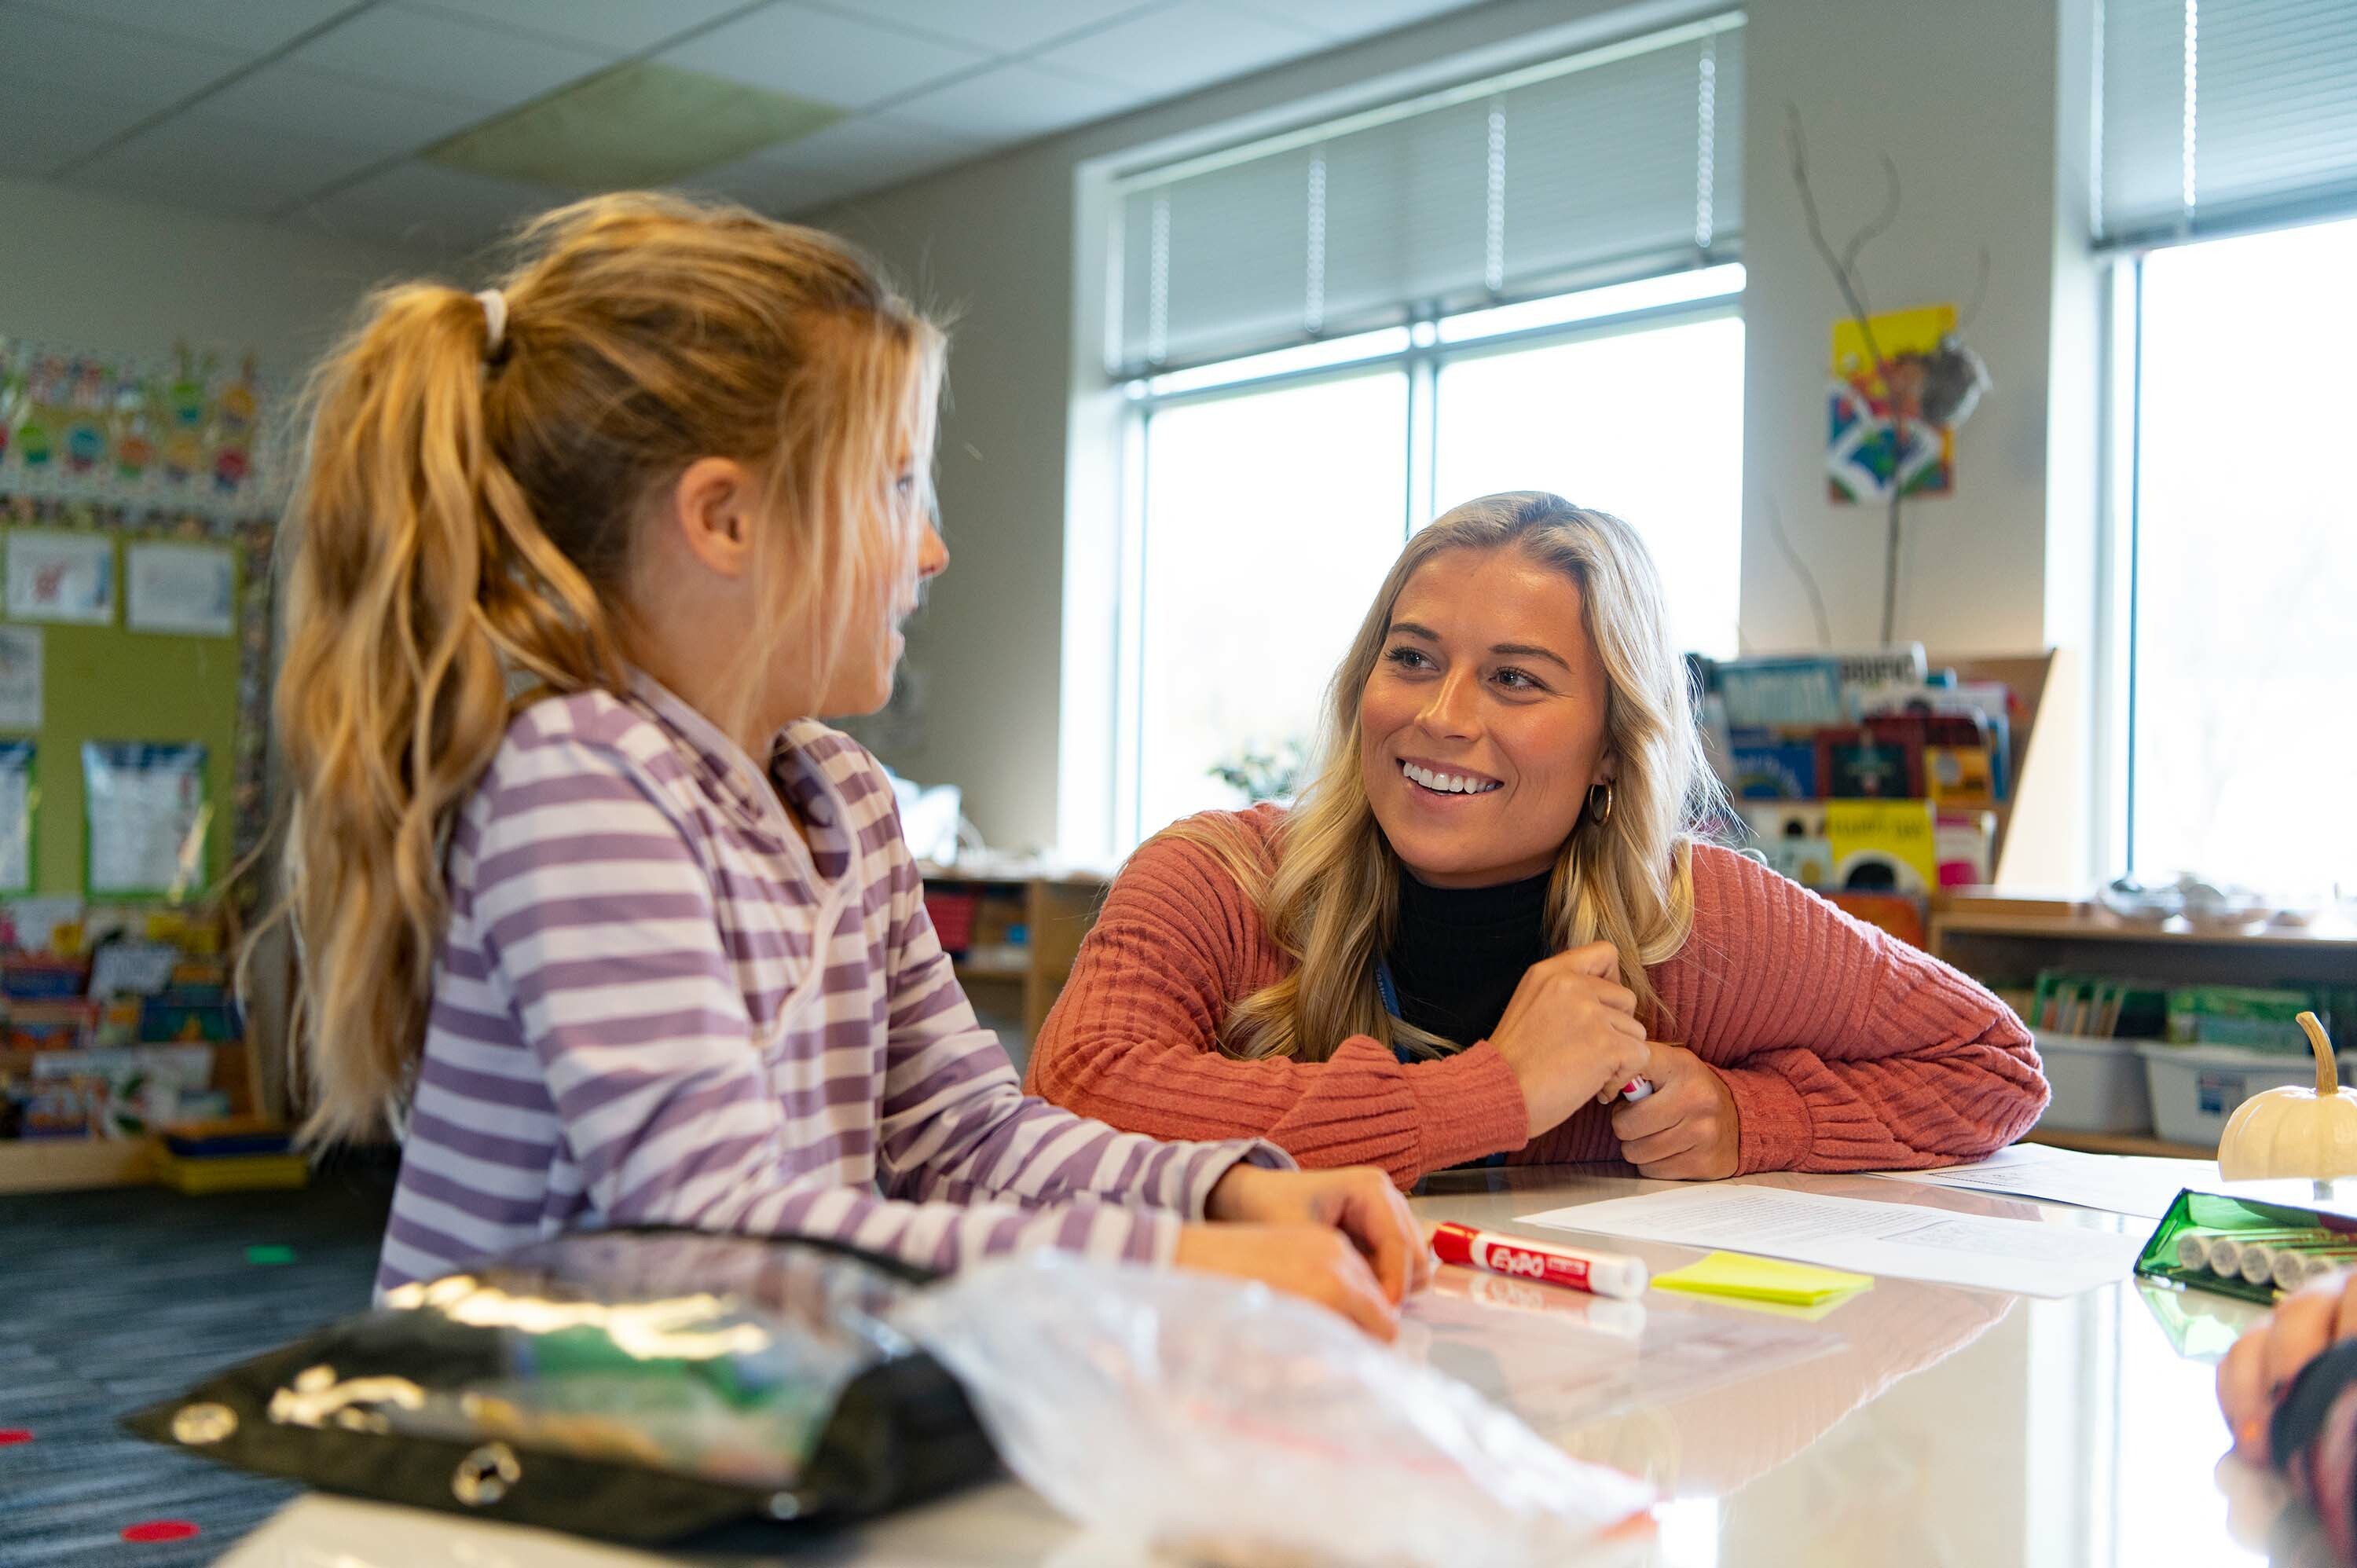 A Dordt student works with a student in class at a local elementary school